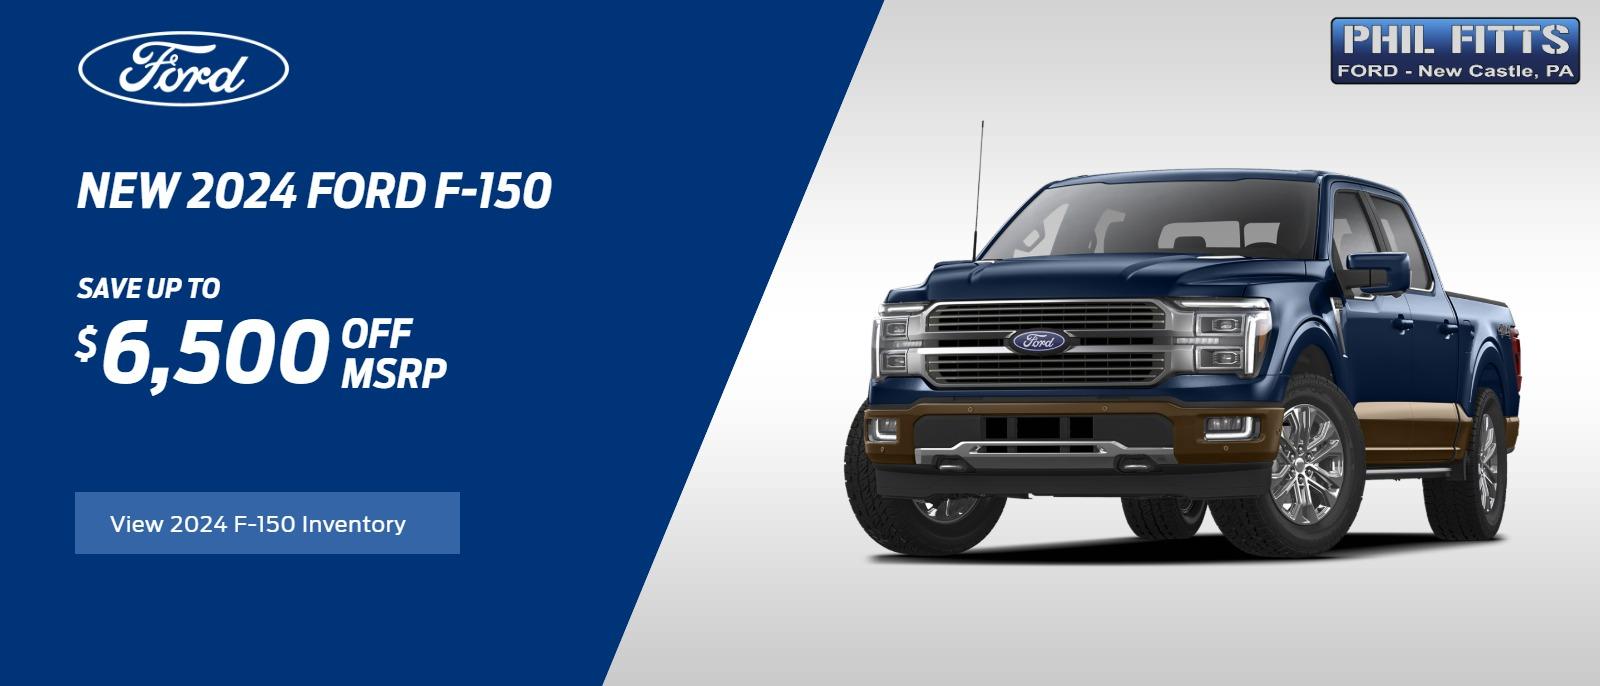 - NEW 2024 Ford F-150's
Save Up To $6,500 off MSRP
- add a jelly image of a 2024 f-150
- link to new 2024 F-150's
- CTA verbiage: View 2024 F-150 Inventory